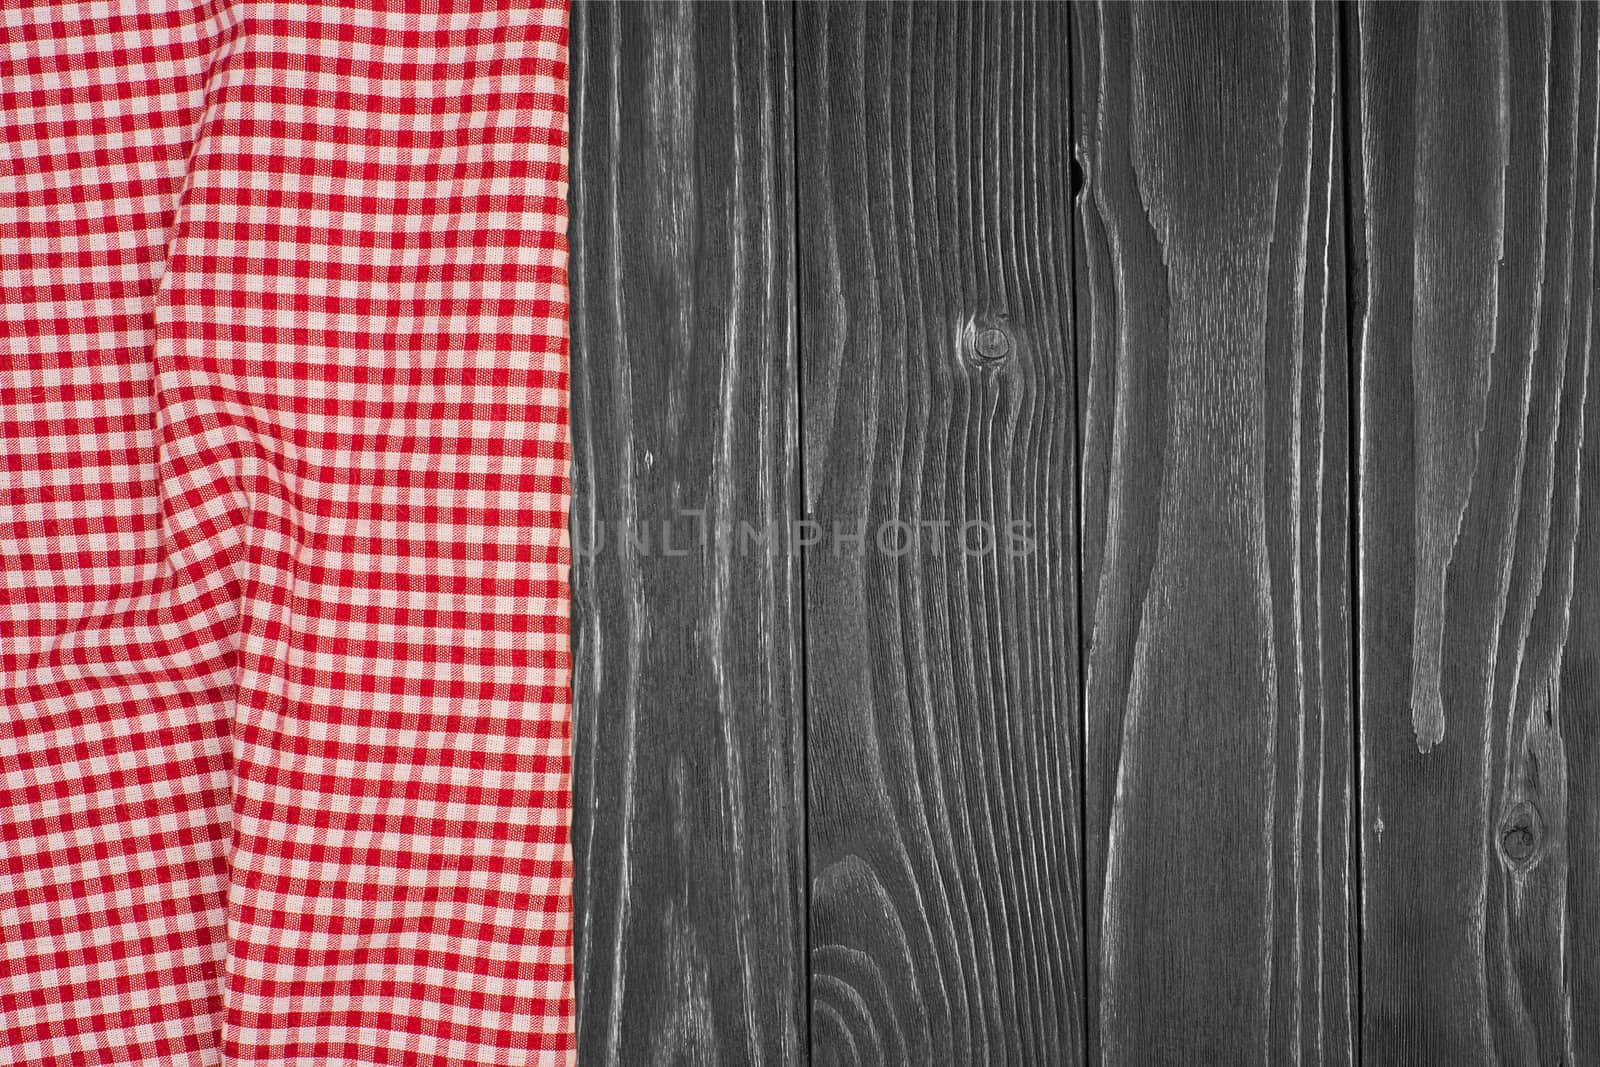 the checkered tablecloth on wooden table. Top view.